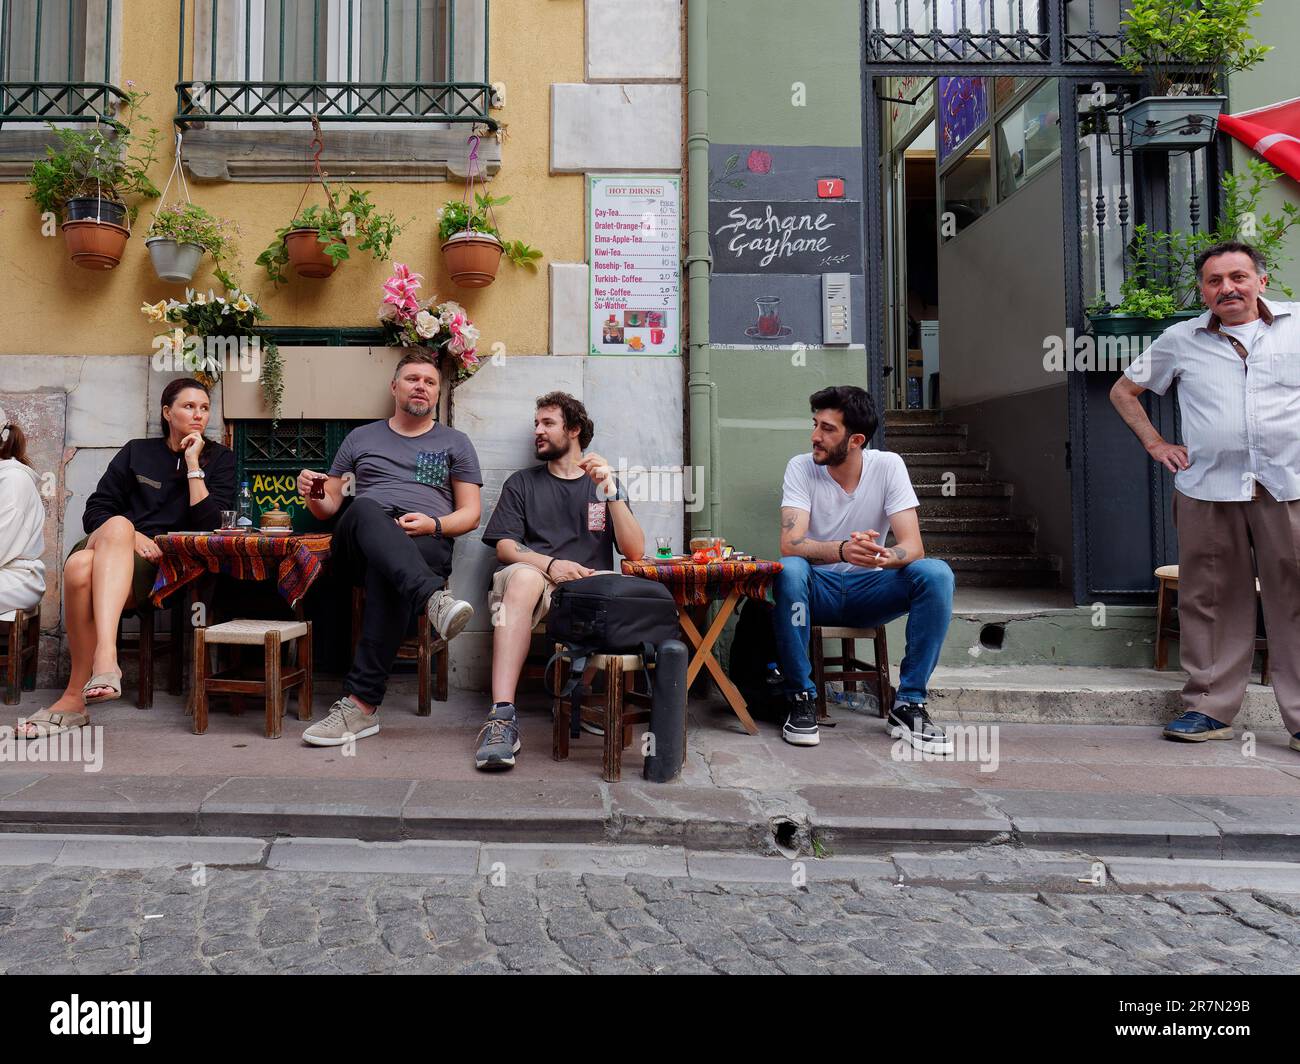 Friends enjoying a Turkish tea on informal table and chairs on a pavement in a quaint street with flower pots in the Galata area of Istanbul, Turkey Stock Photo